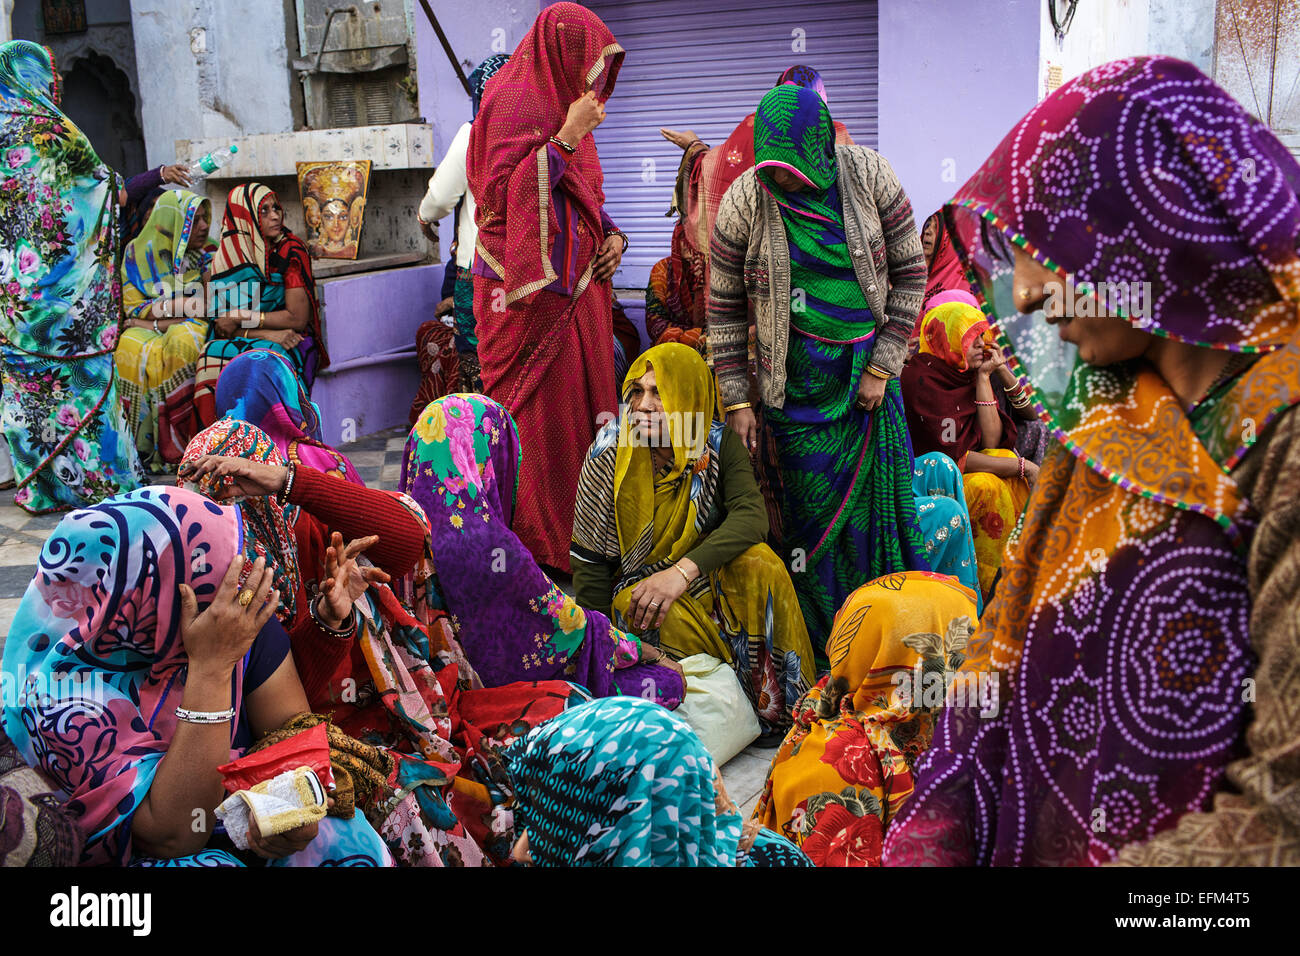 A group of colorfully dressed women mourning a death of a person in Pushkar, Rajasthan, India Stock Photo